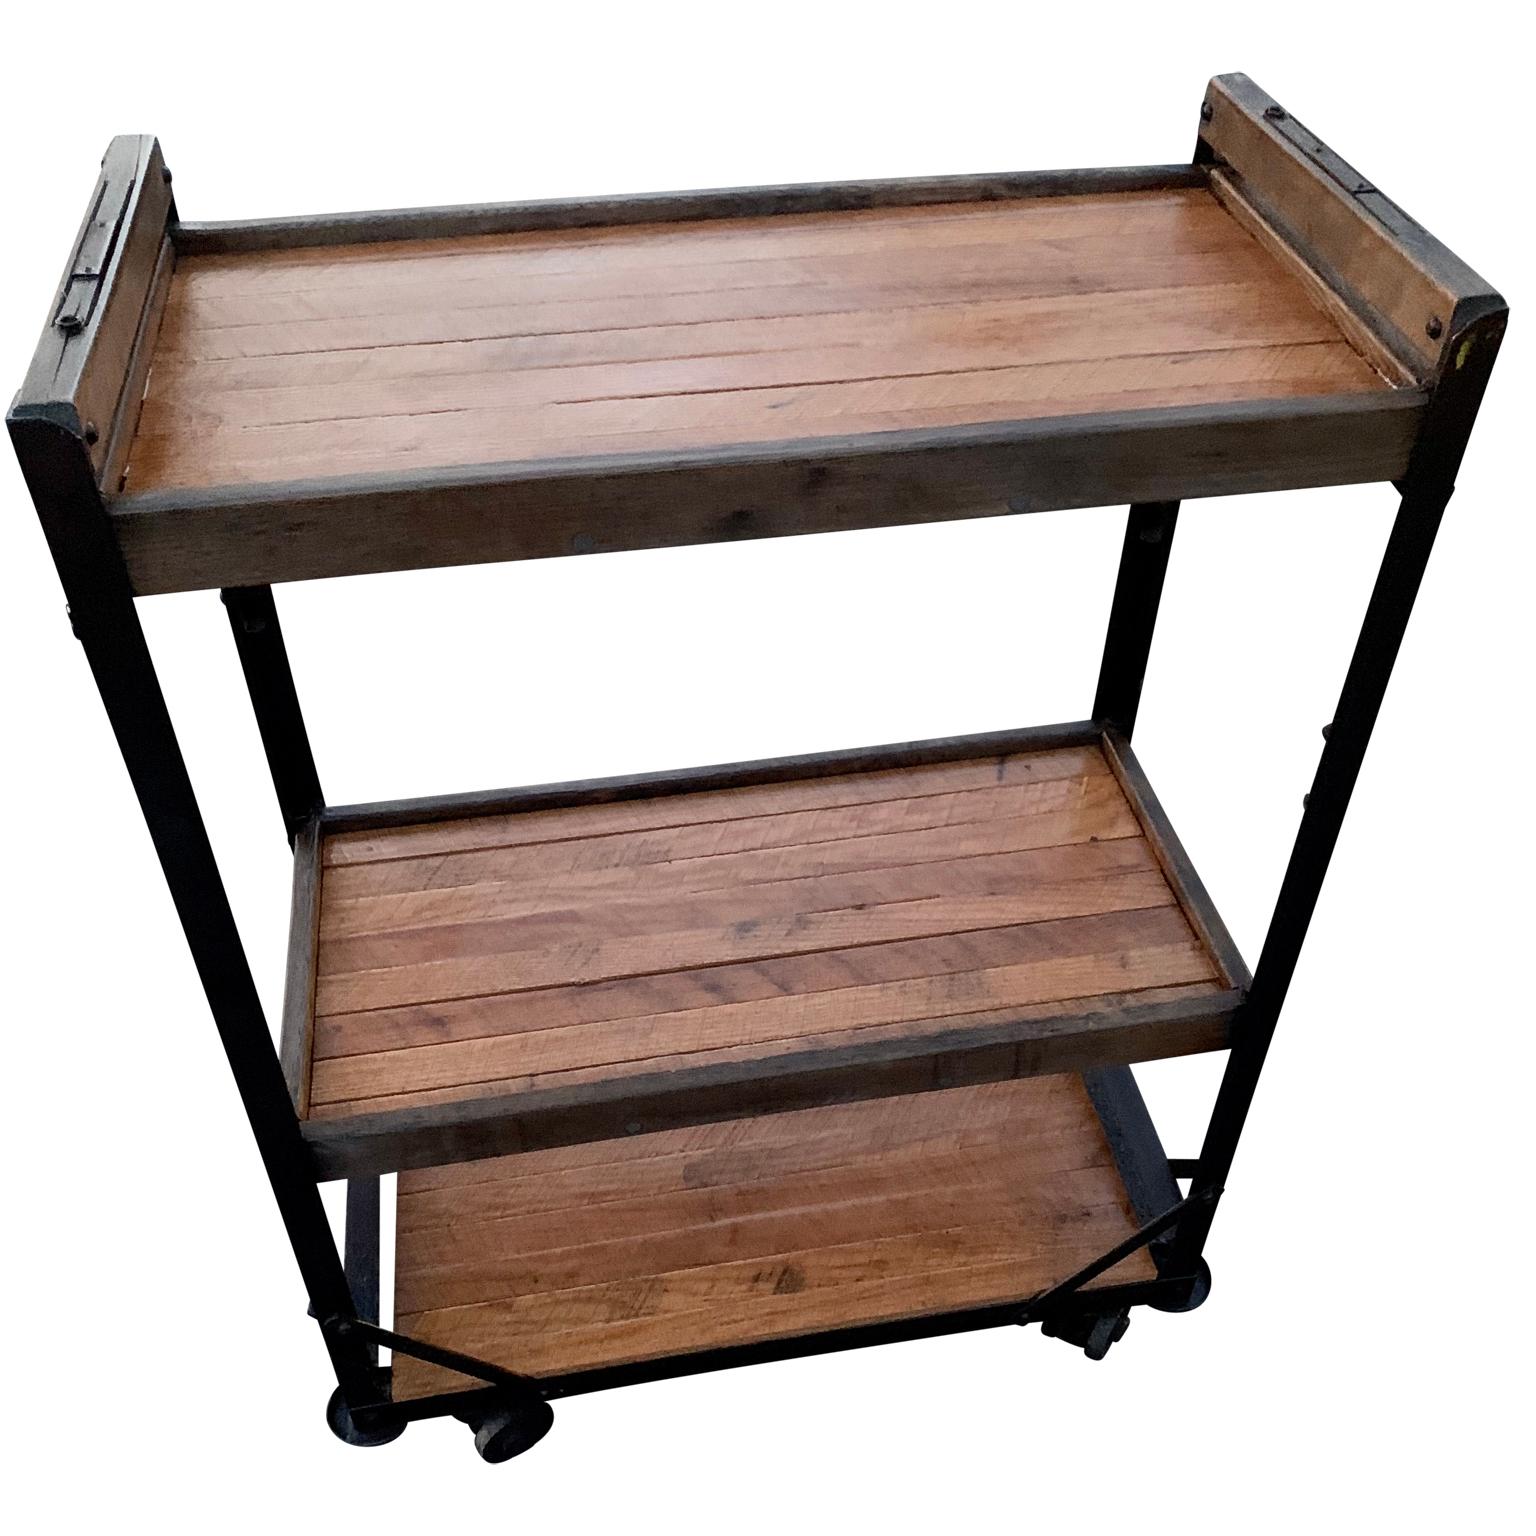 American 1960s wooden shelves, carts or bread racks on industrial iron wheels.
 